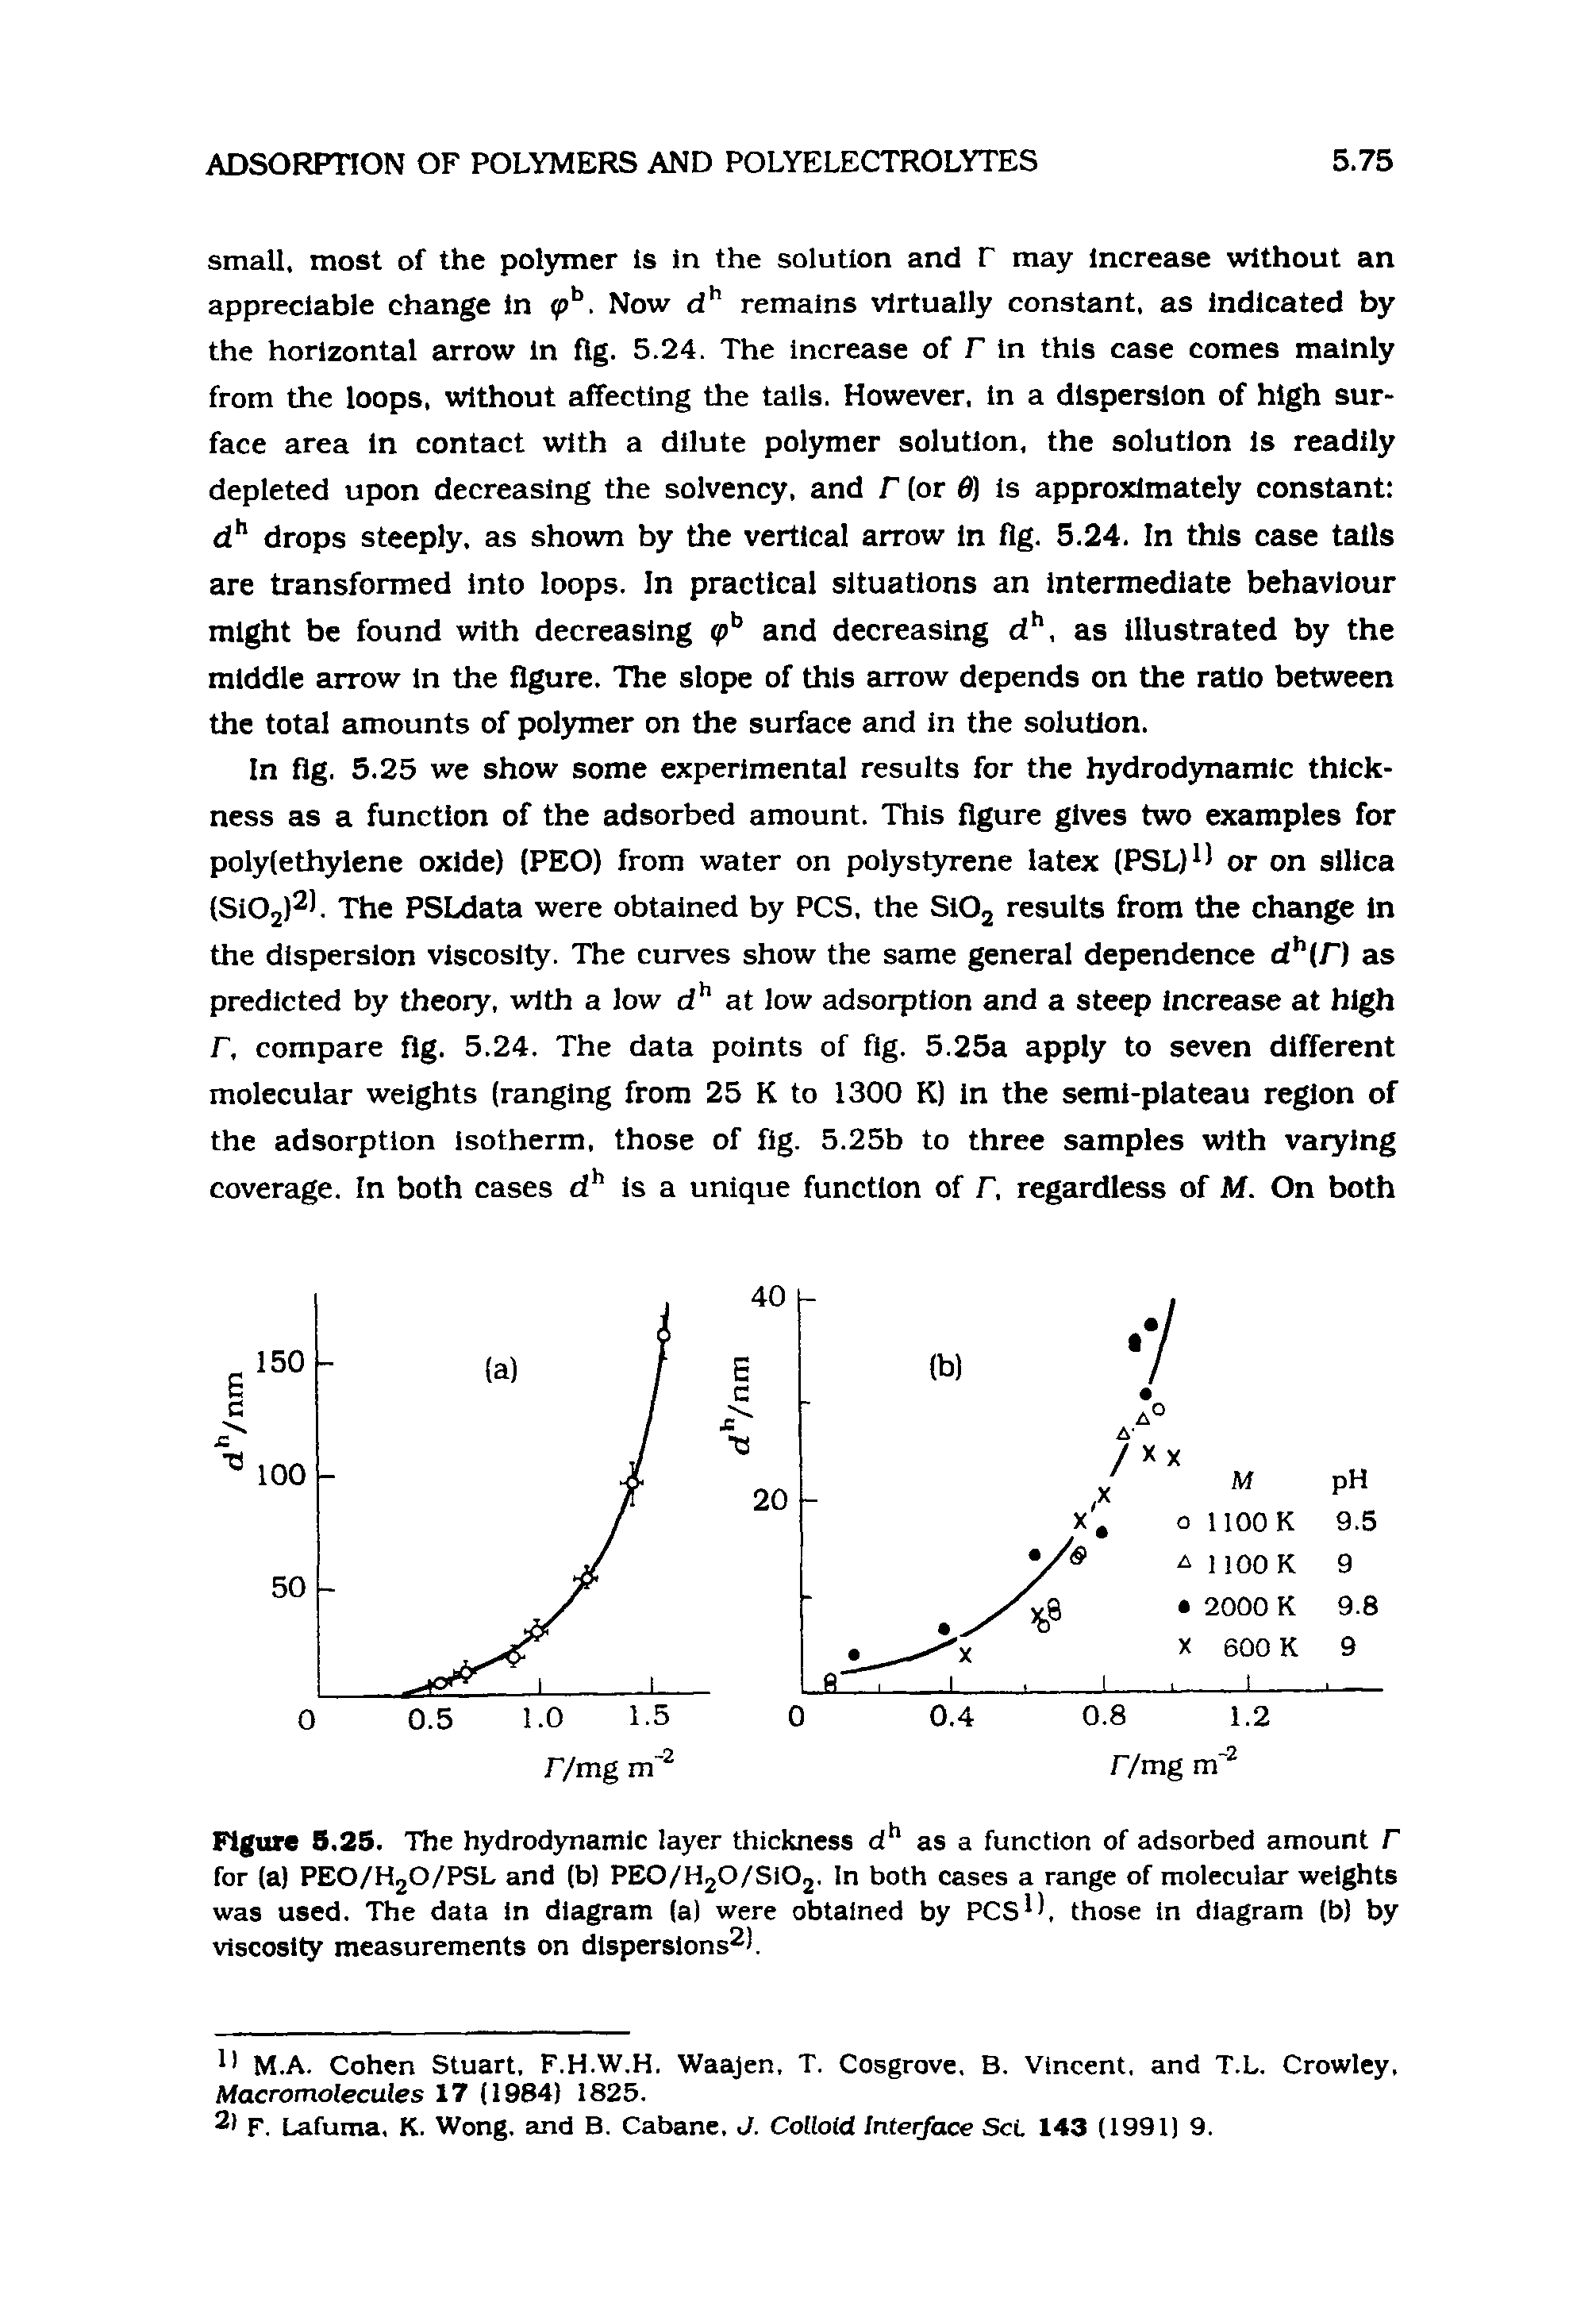 Figure 5.25. The hydrodynamic layer thickness as a function of adsorbed amount F for (a) PEO/H2O/PSL and (b) PE0/H20/S102. In both cases a range of molecular weights was used. The data in diagram (a) were obtained by PCS ). those in diagram (b) by viscosity measurements on dispersions .